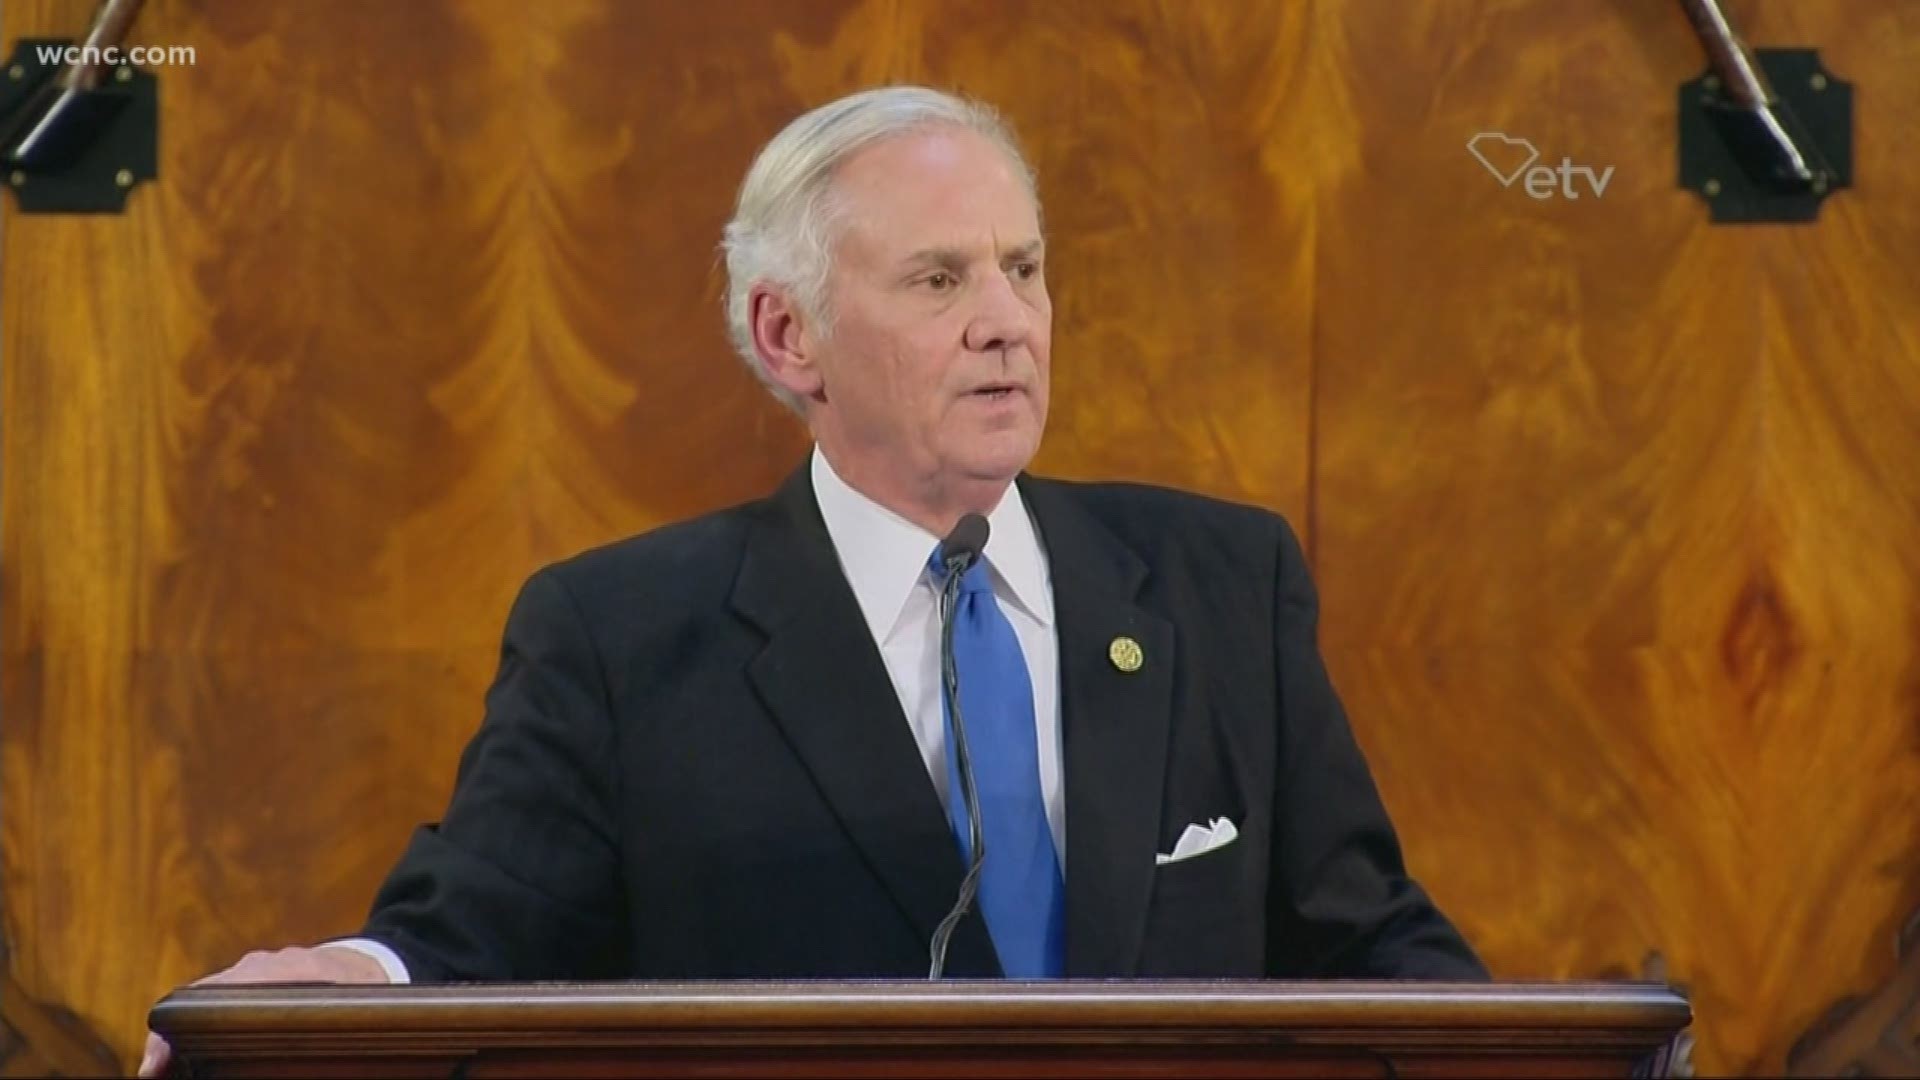 Gov. McMaster said in the last two years, 27,000 new jobs were added and the unemployment rate hit an all-time low. He also discussed his budget plan and goals for public education.